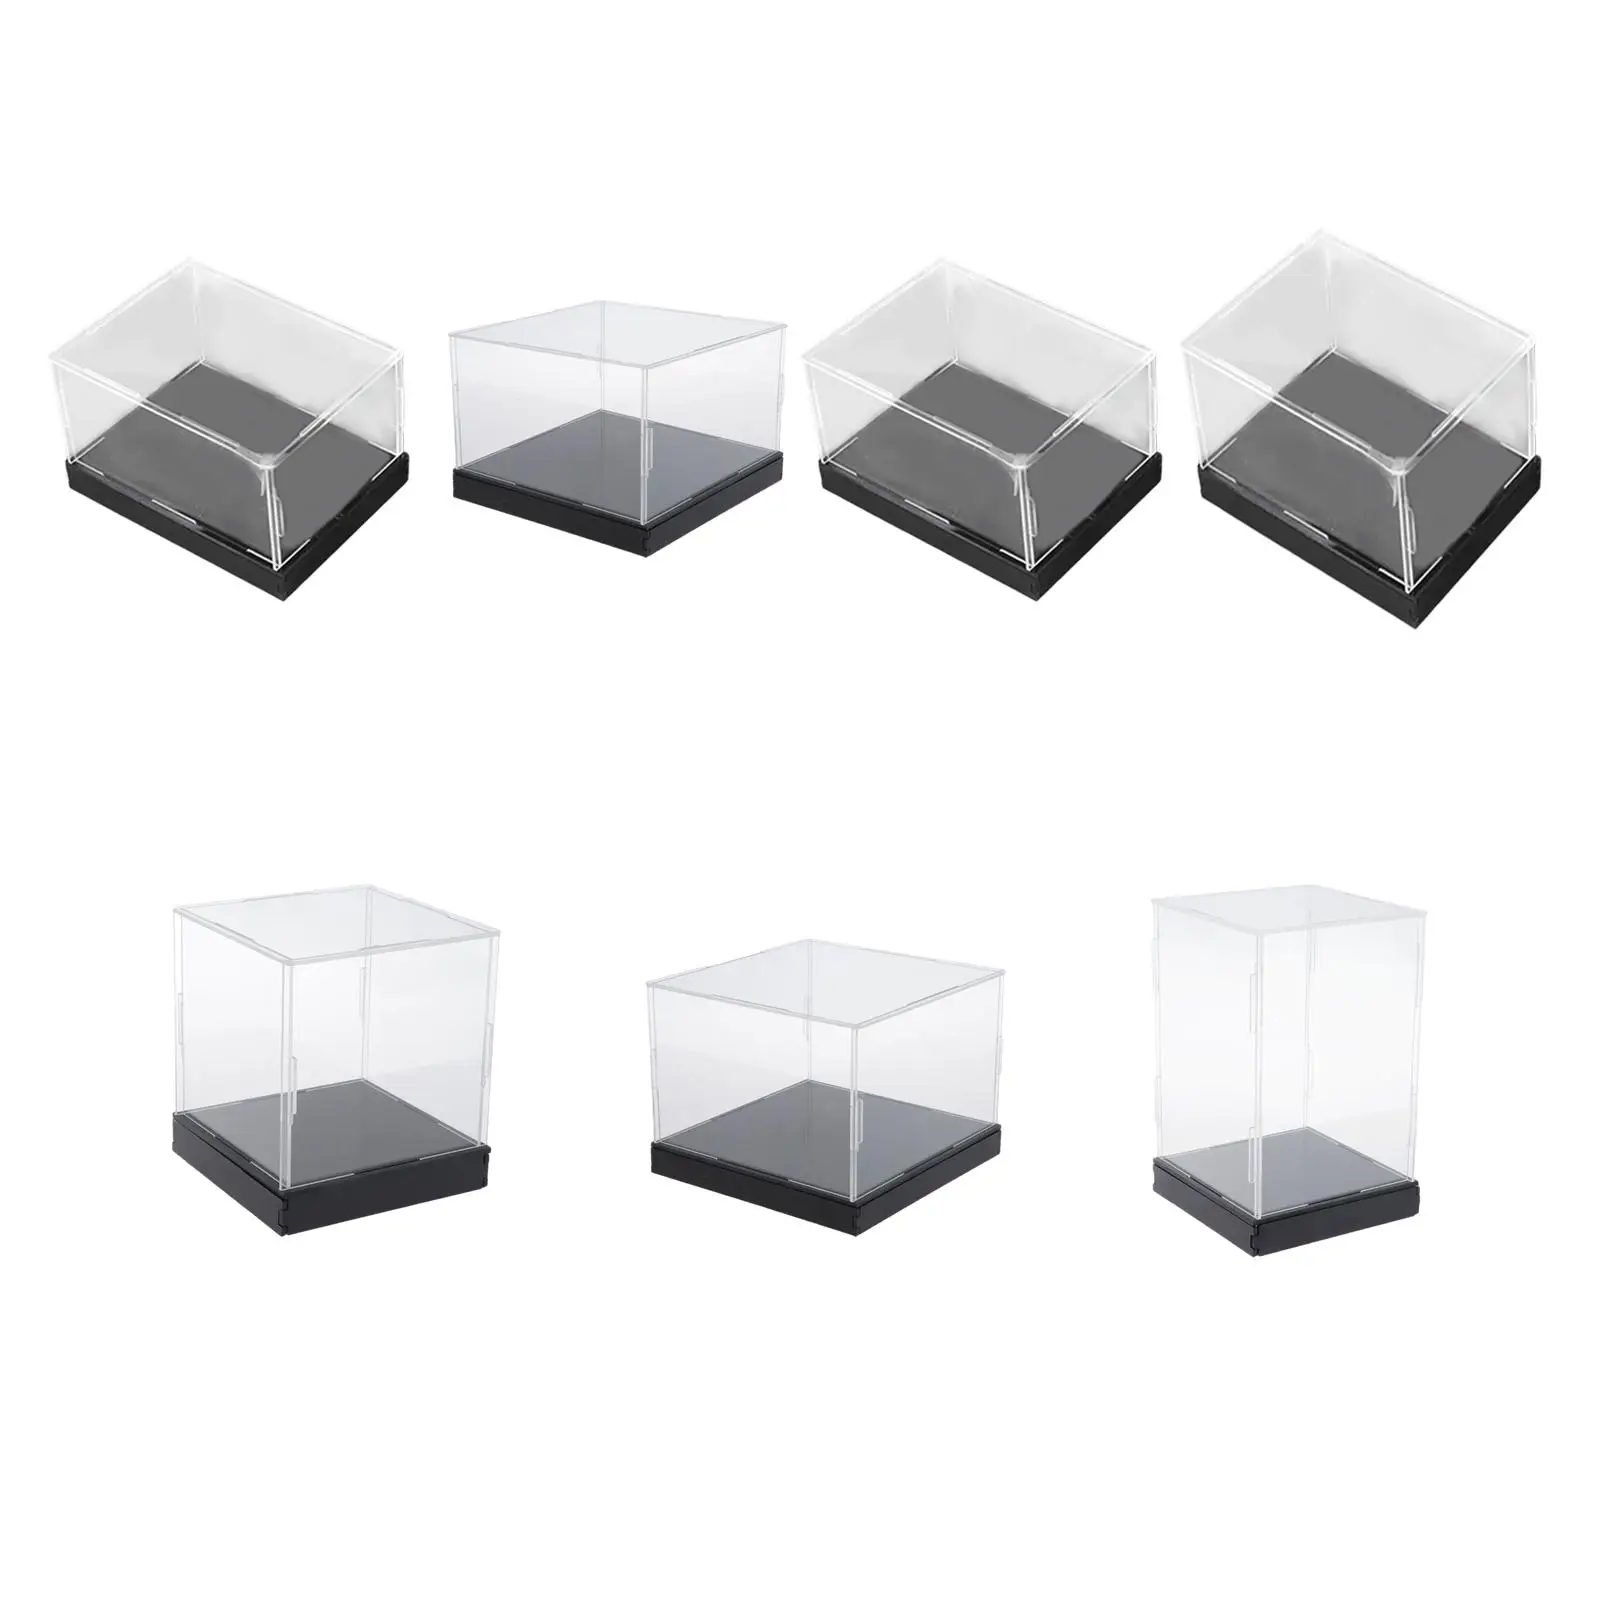 Transparent Acrylic Display Box Black Base Multipurpose Dustproof Container for Souvenirs Cosmetics Model Collectibles Showcase